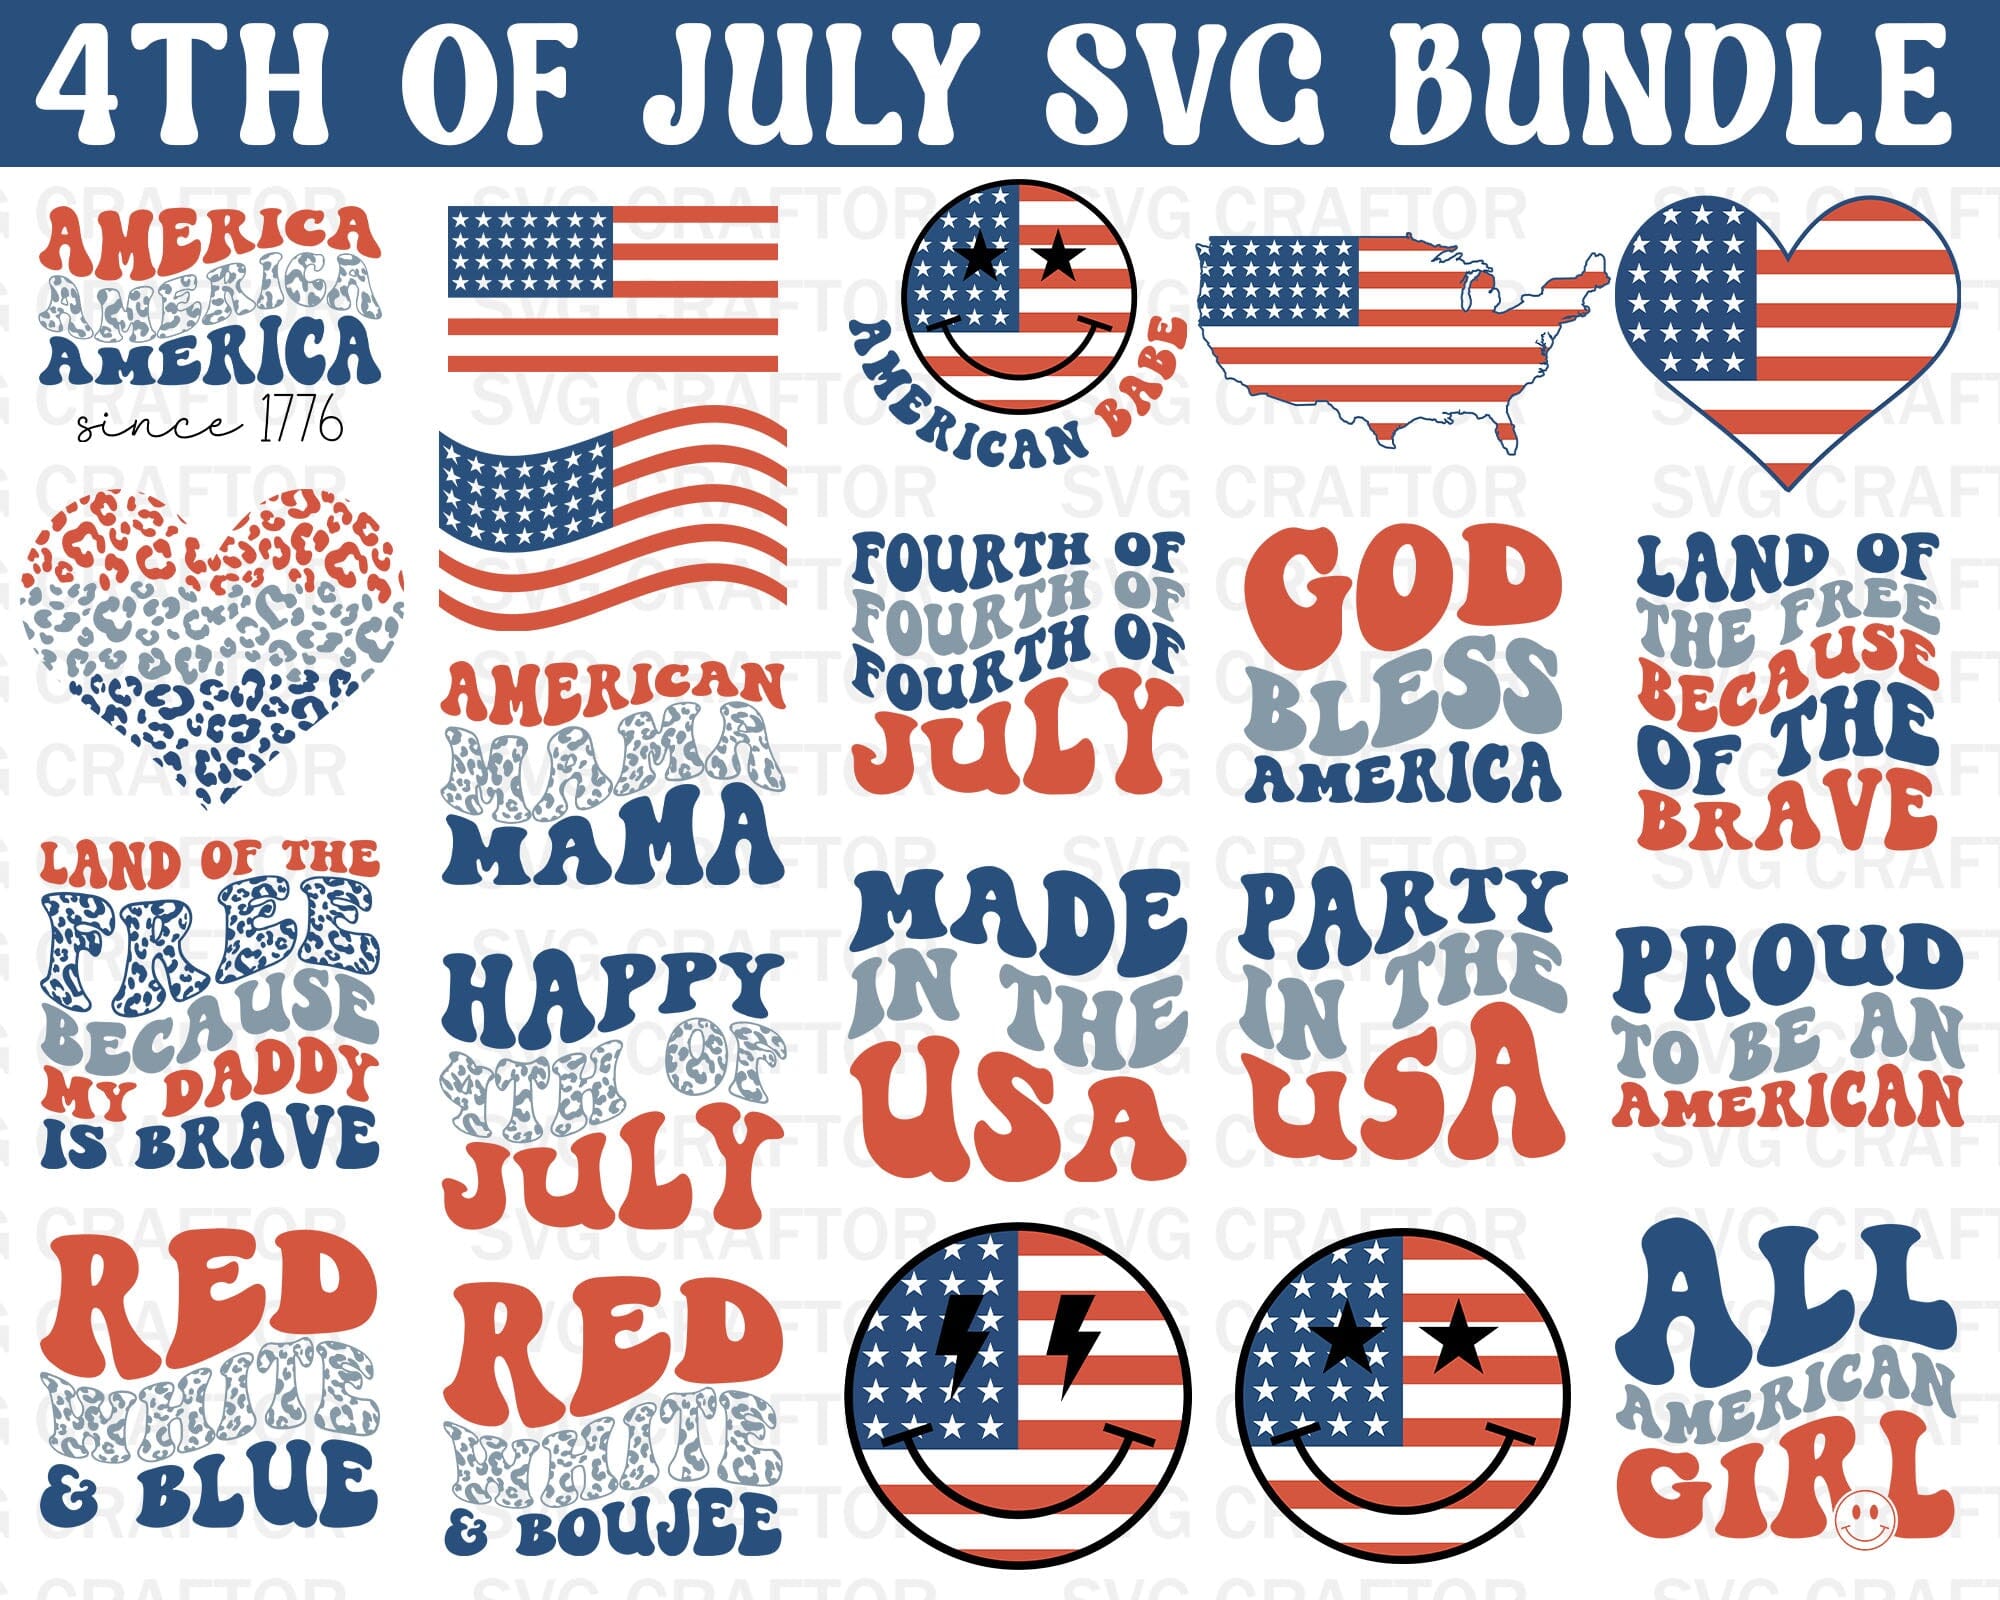 Happy 4th Of July svg vector for t-shirt - Buy t-shirt designs